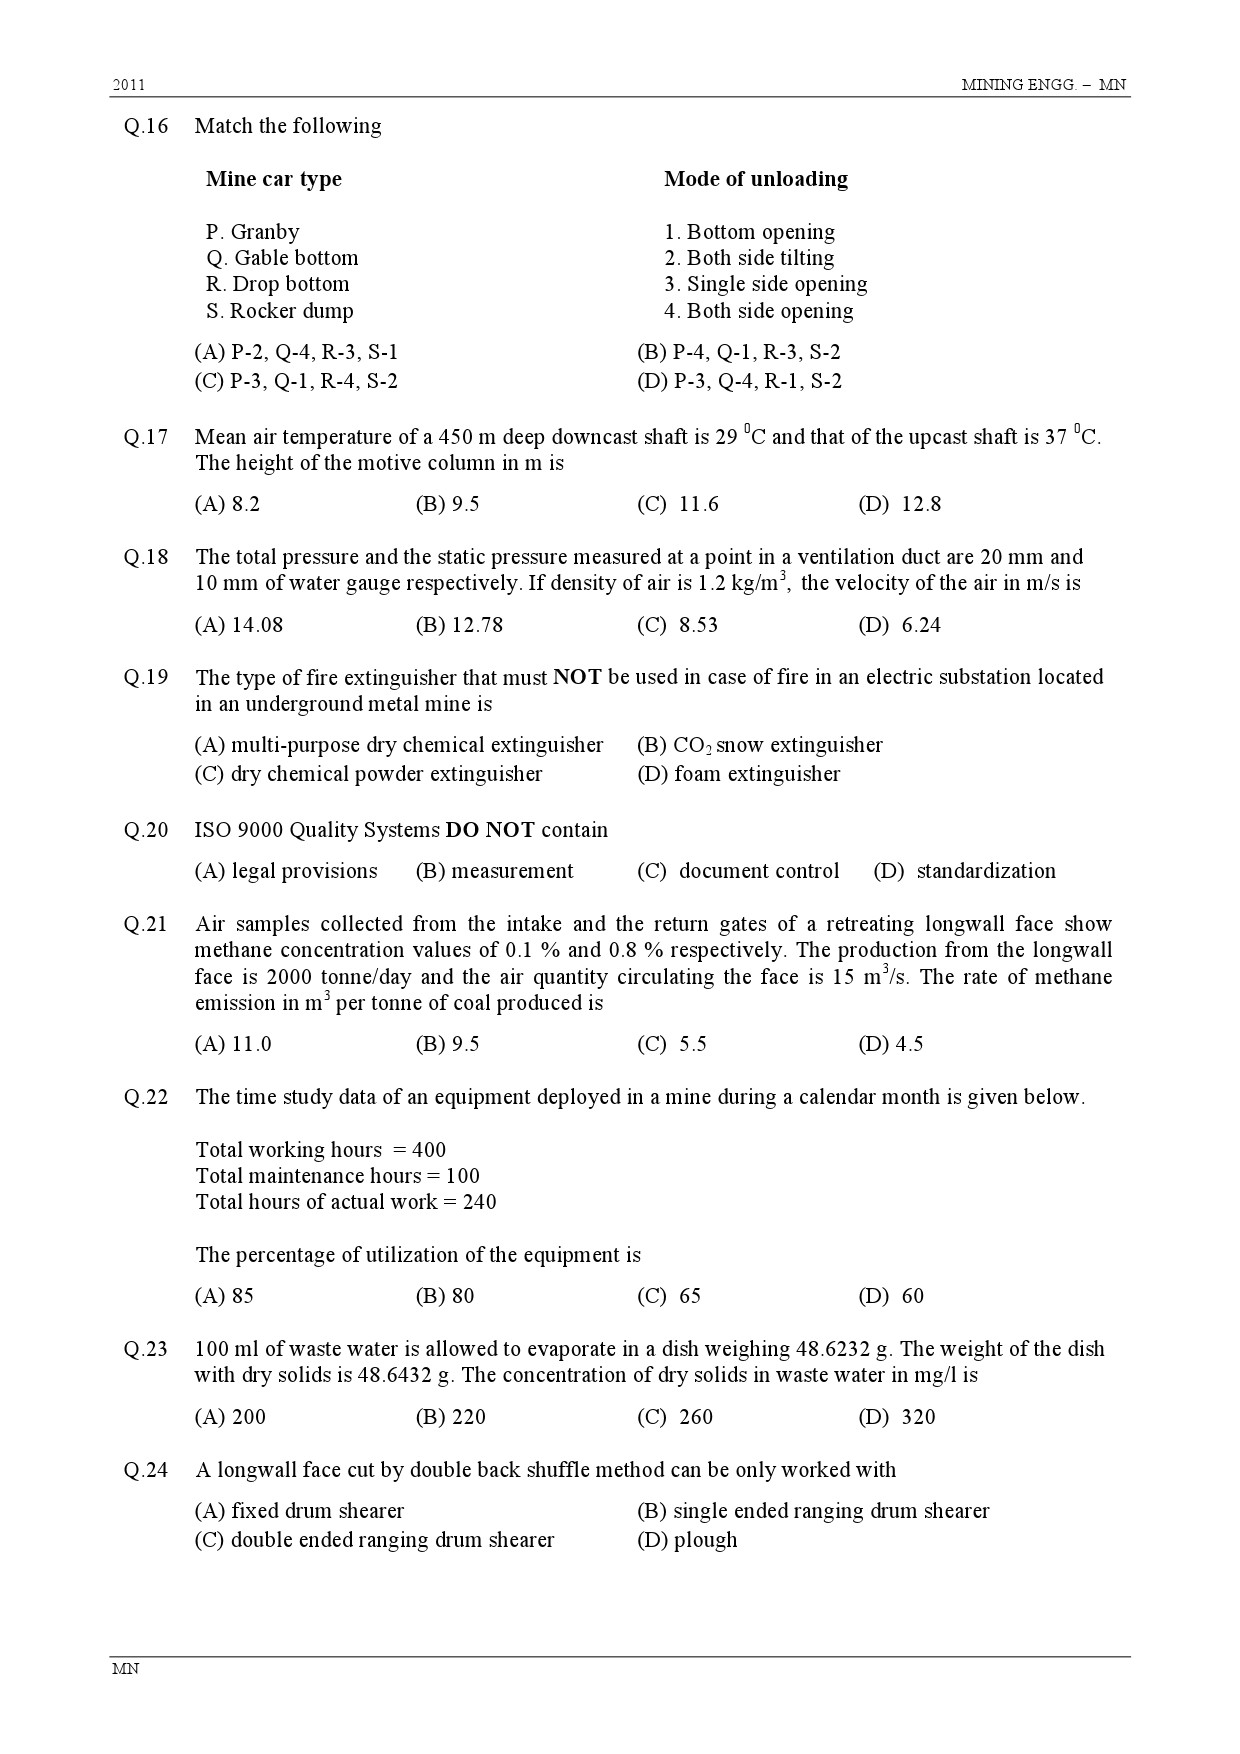 GATE Exam Question Paper 2011 Mining Engineering 4